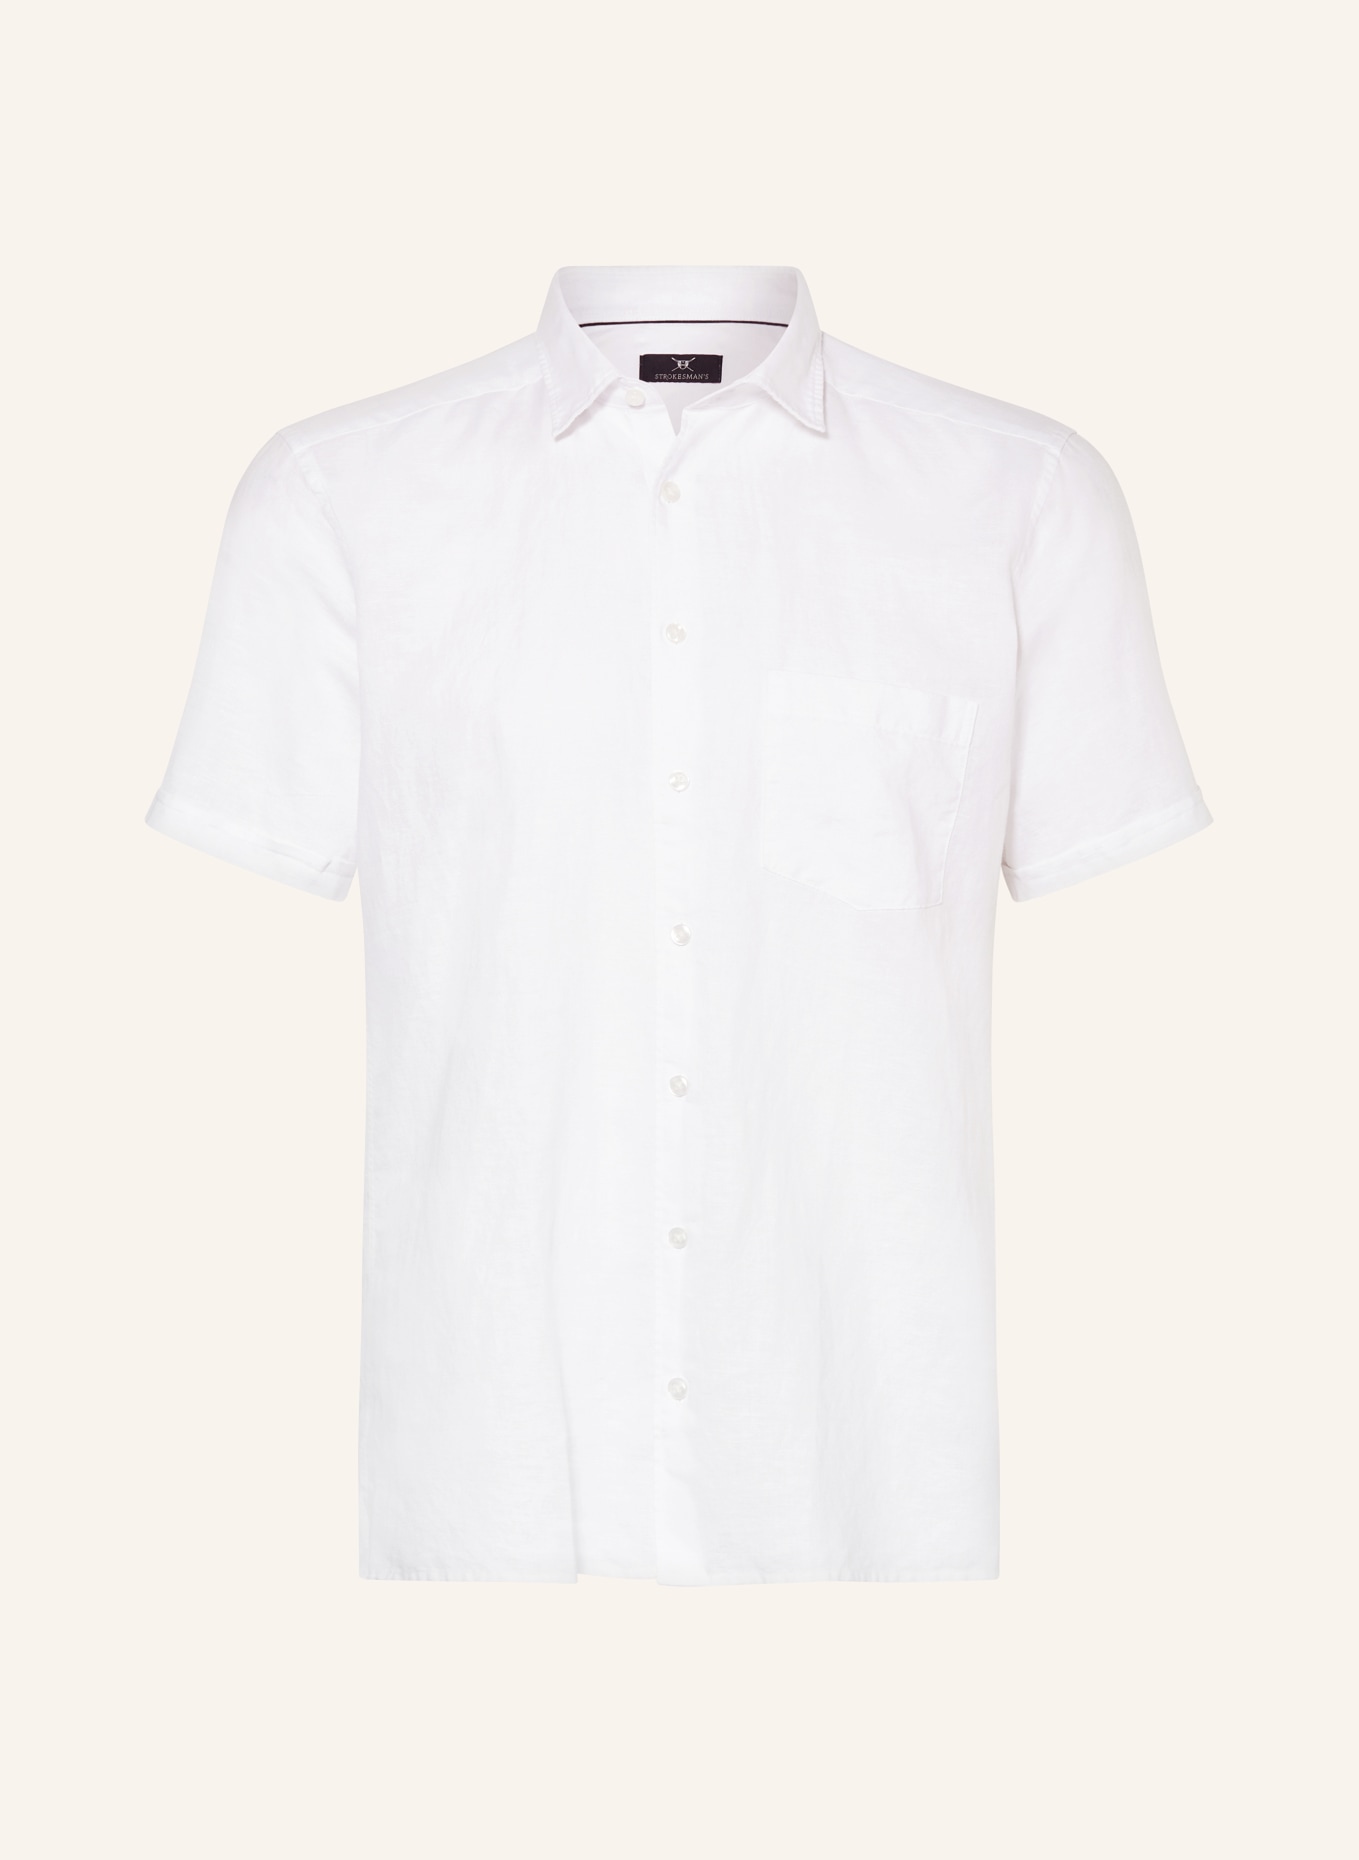 STROKESMAN'S Short sleeve shirt regular fit with linen, Color: WHITE (Image 1)